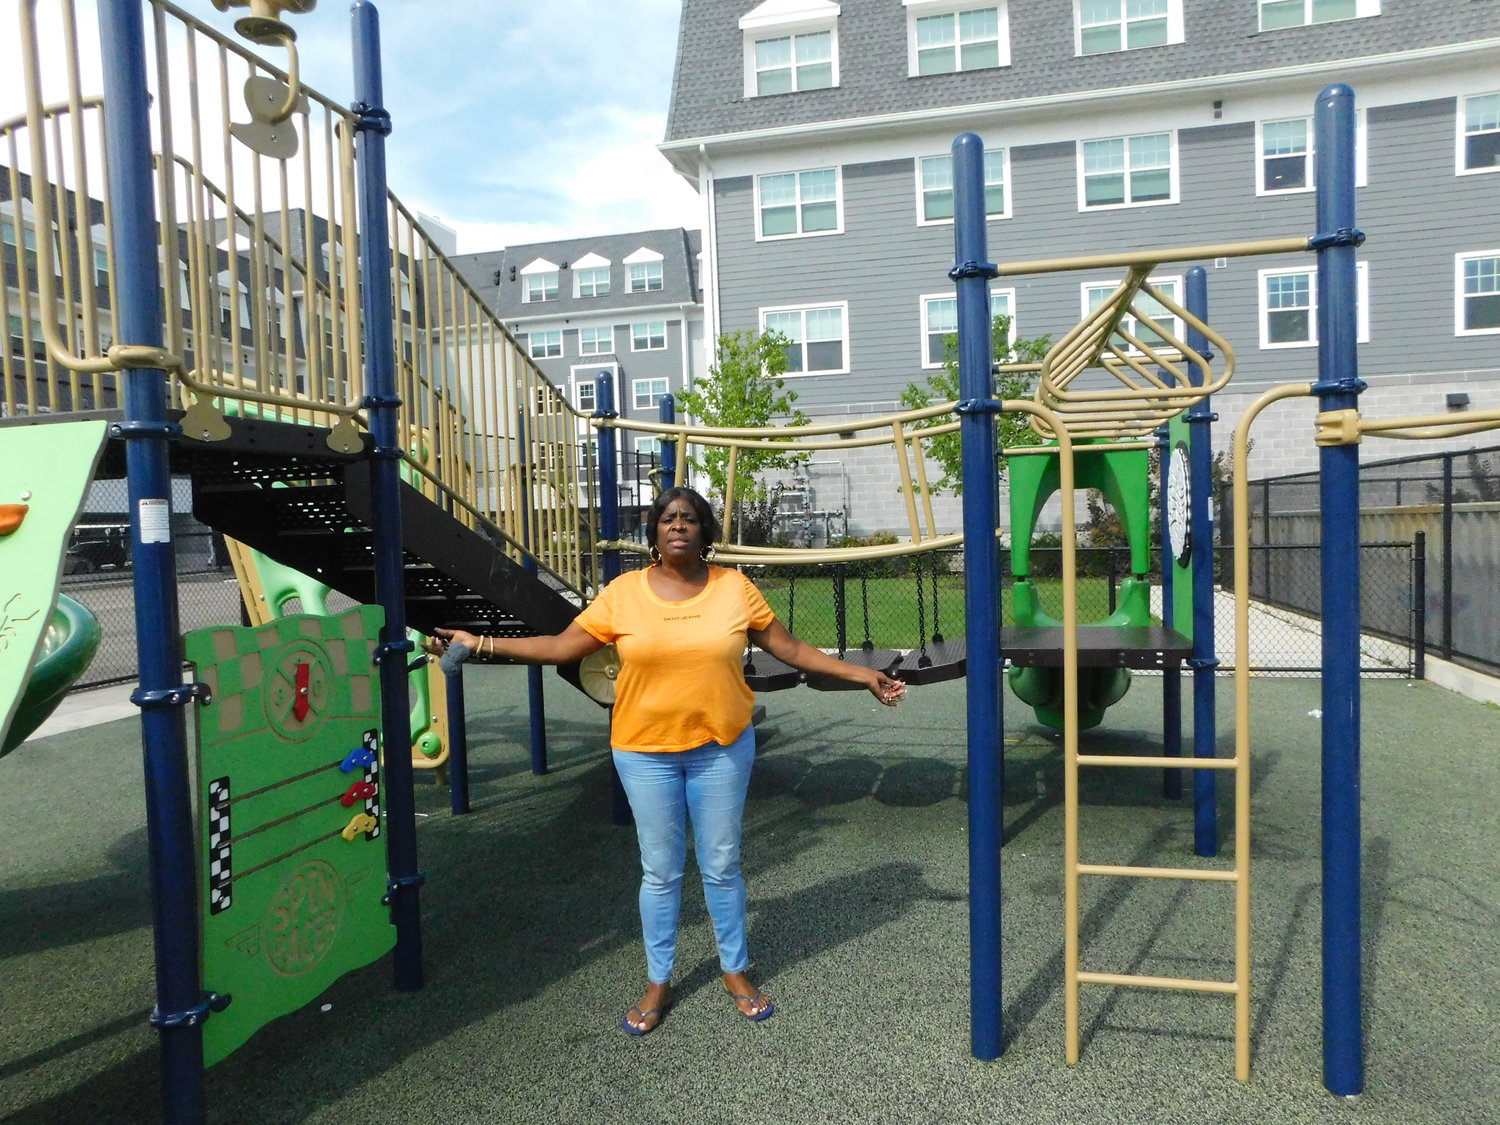 Charlene Ladson gestured toward the small fenced-in playground at the Moxey Rigby apartment complex. The playground does not accommodate older children.